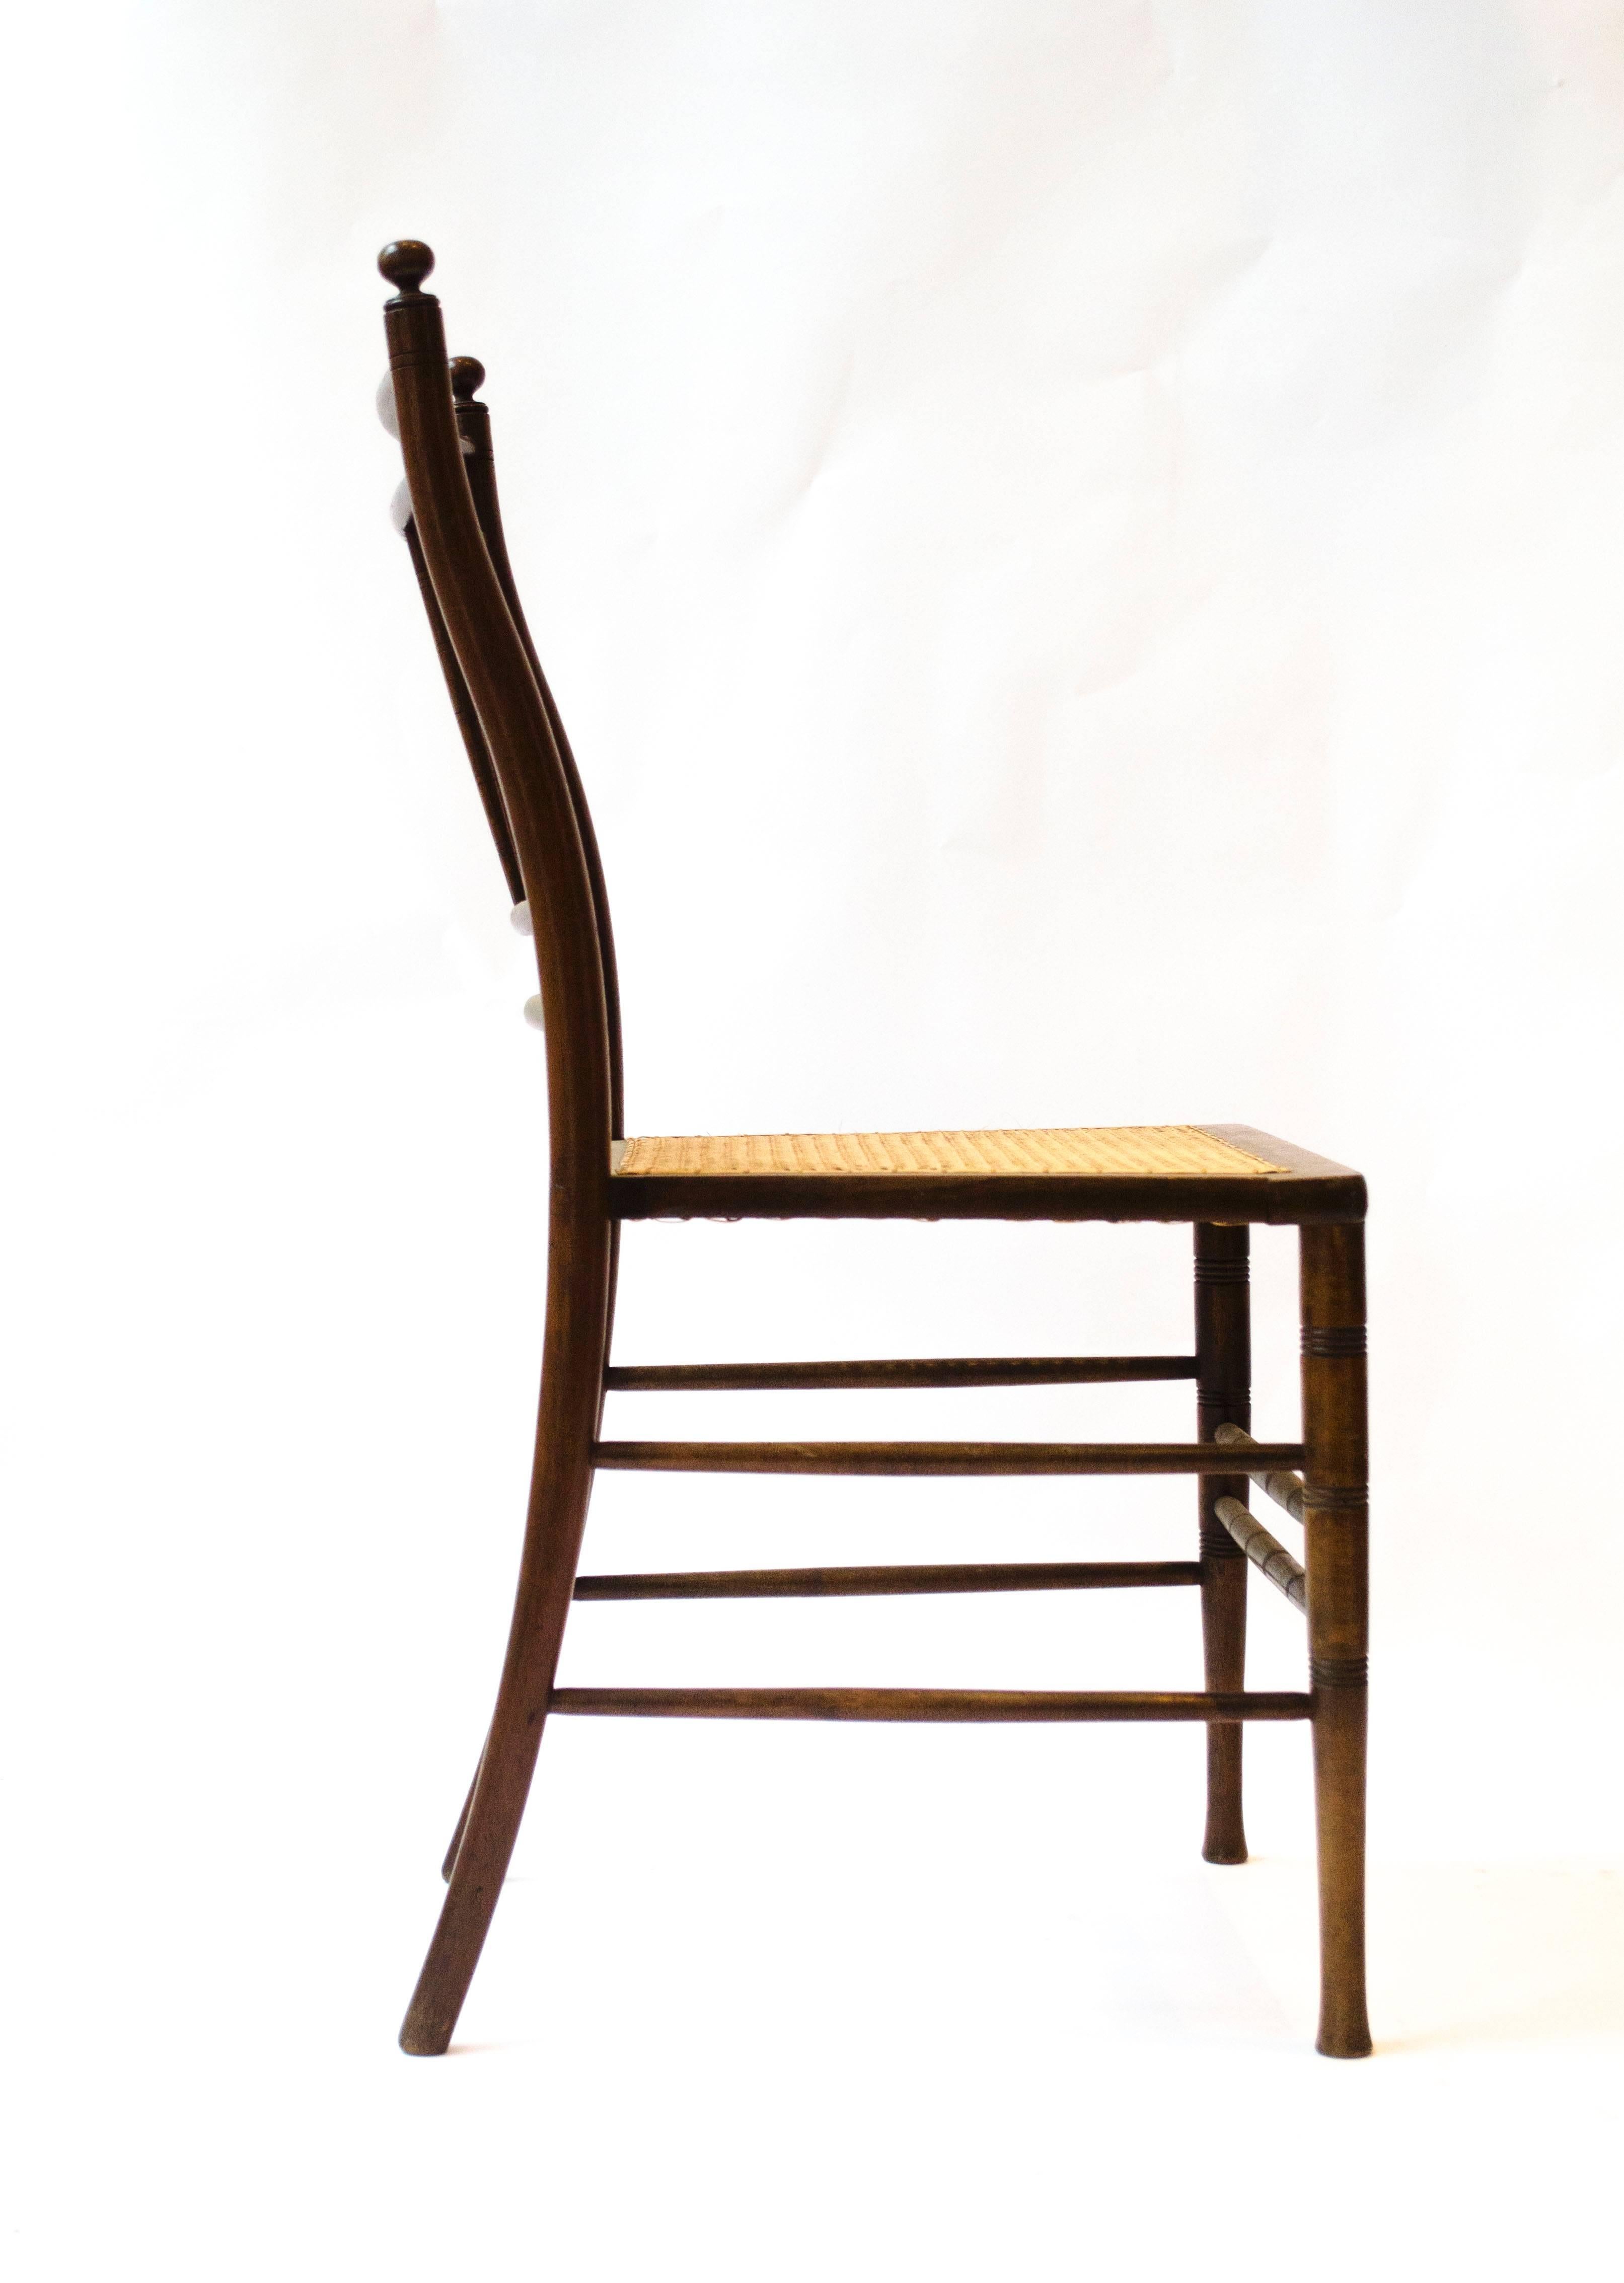 Anglo-Japanese walnut side chair, attributed to E W Godwin.
Probably made by William Watt.
The turnings to the back rest and the turned legs and stretchers with incised or scribed detailed lines grouped in sets of three are all details from other